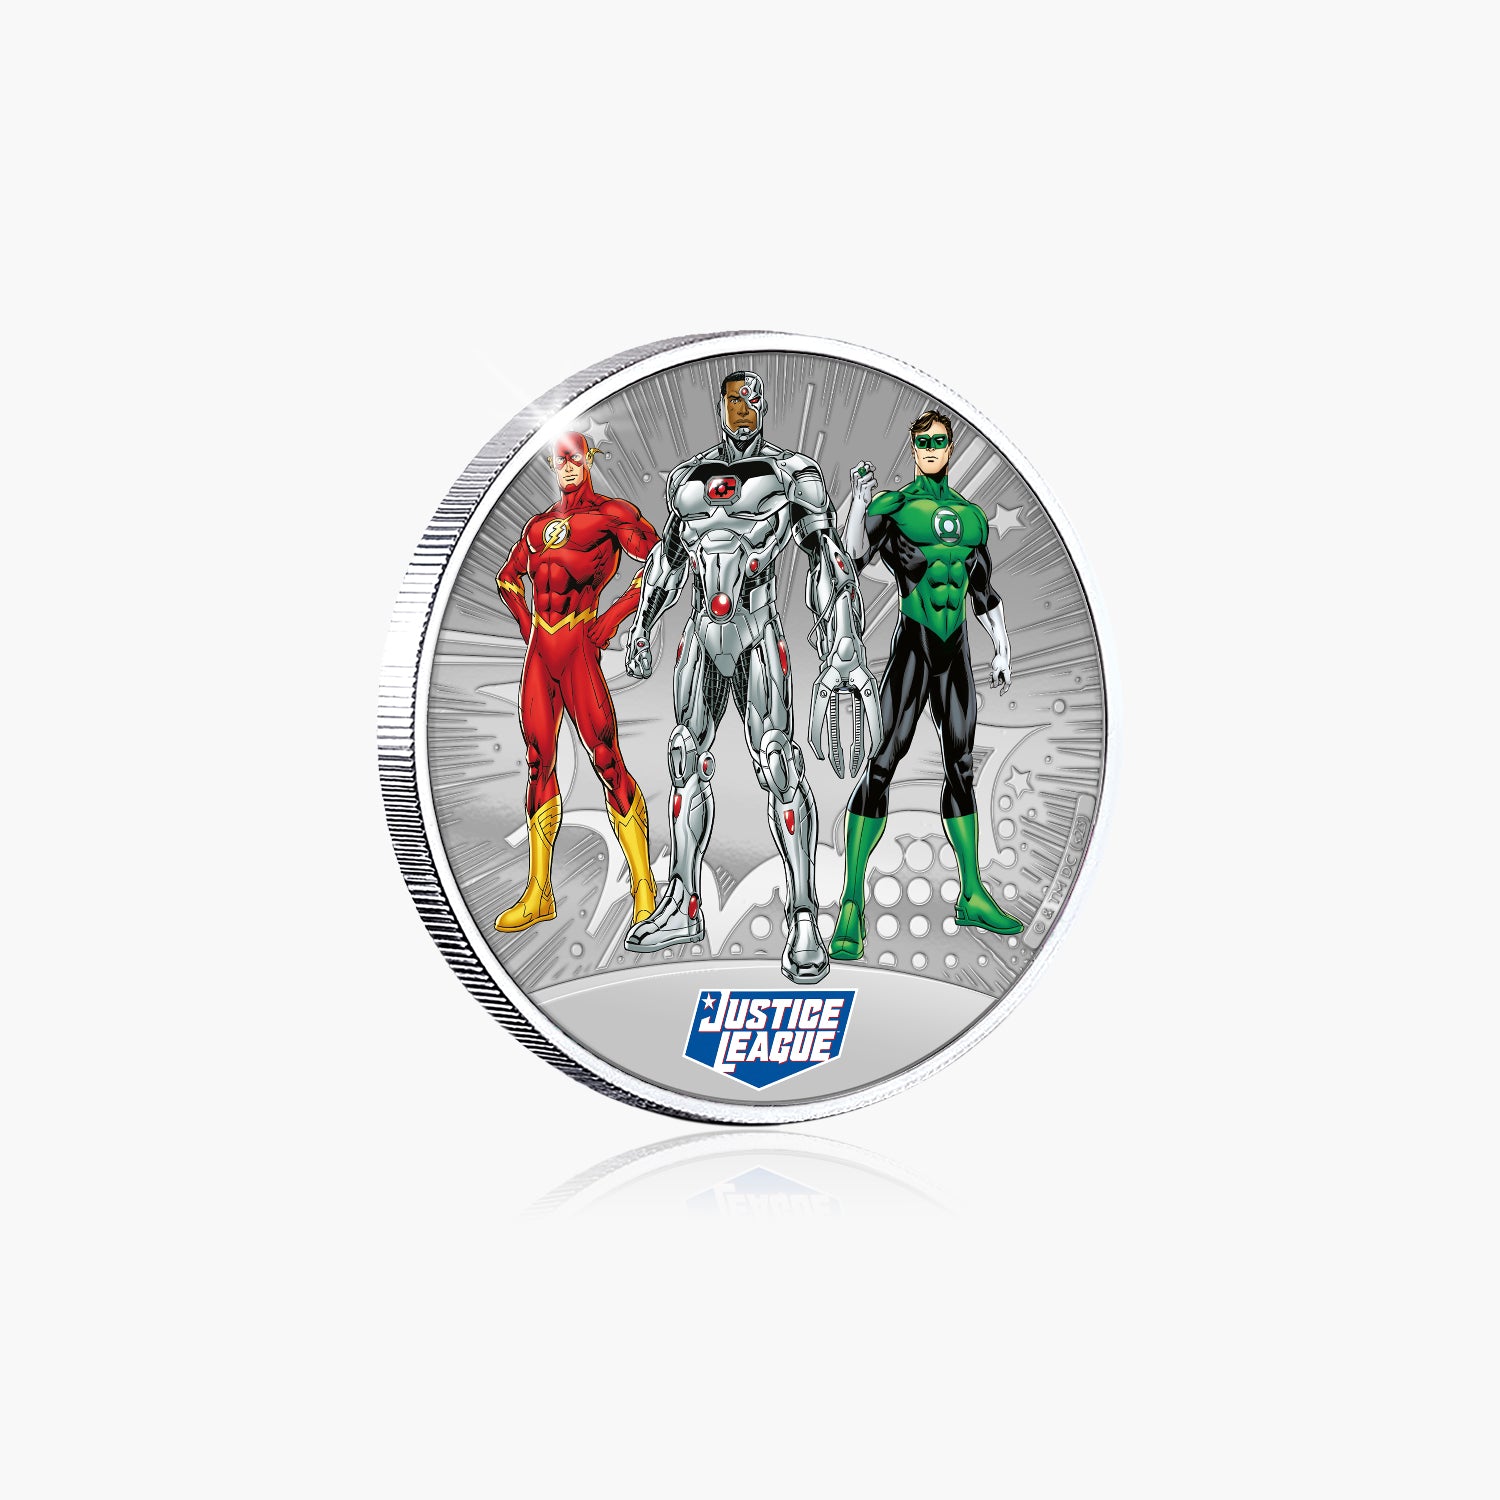 Justice League - The Flash - Cyborg - Green Lantern Silver Plated Commemorative